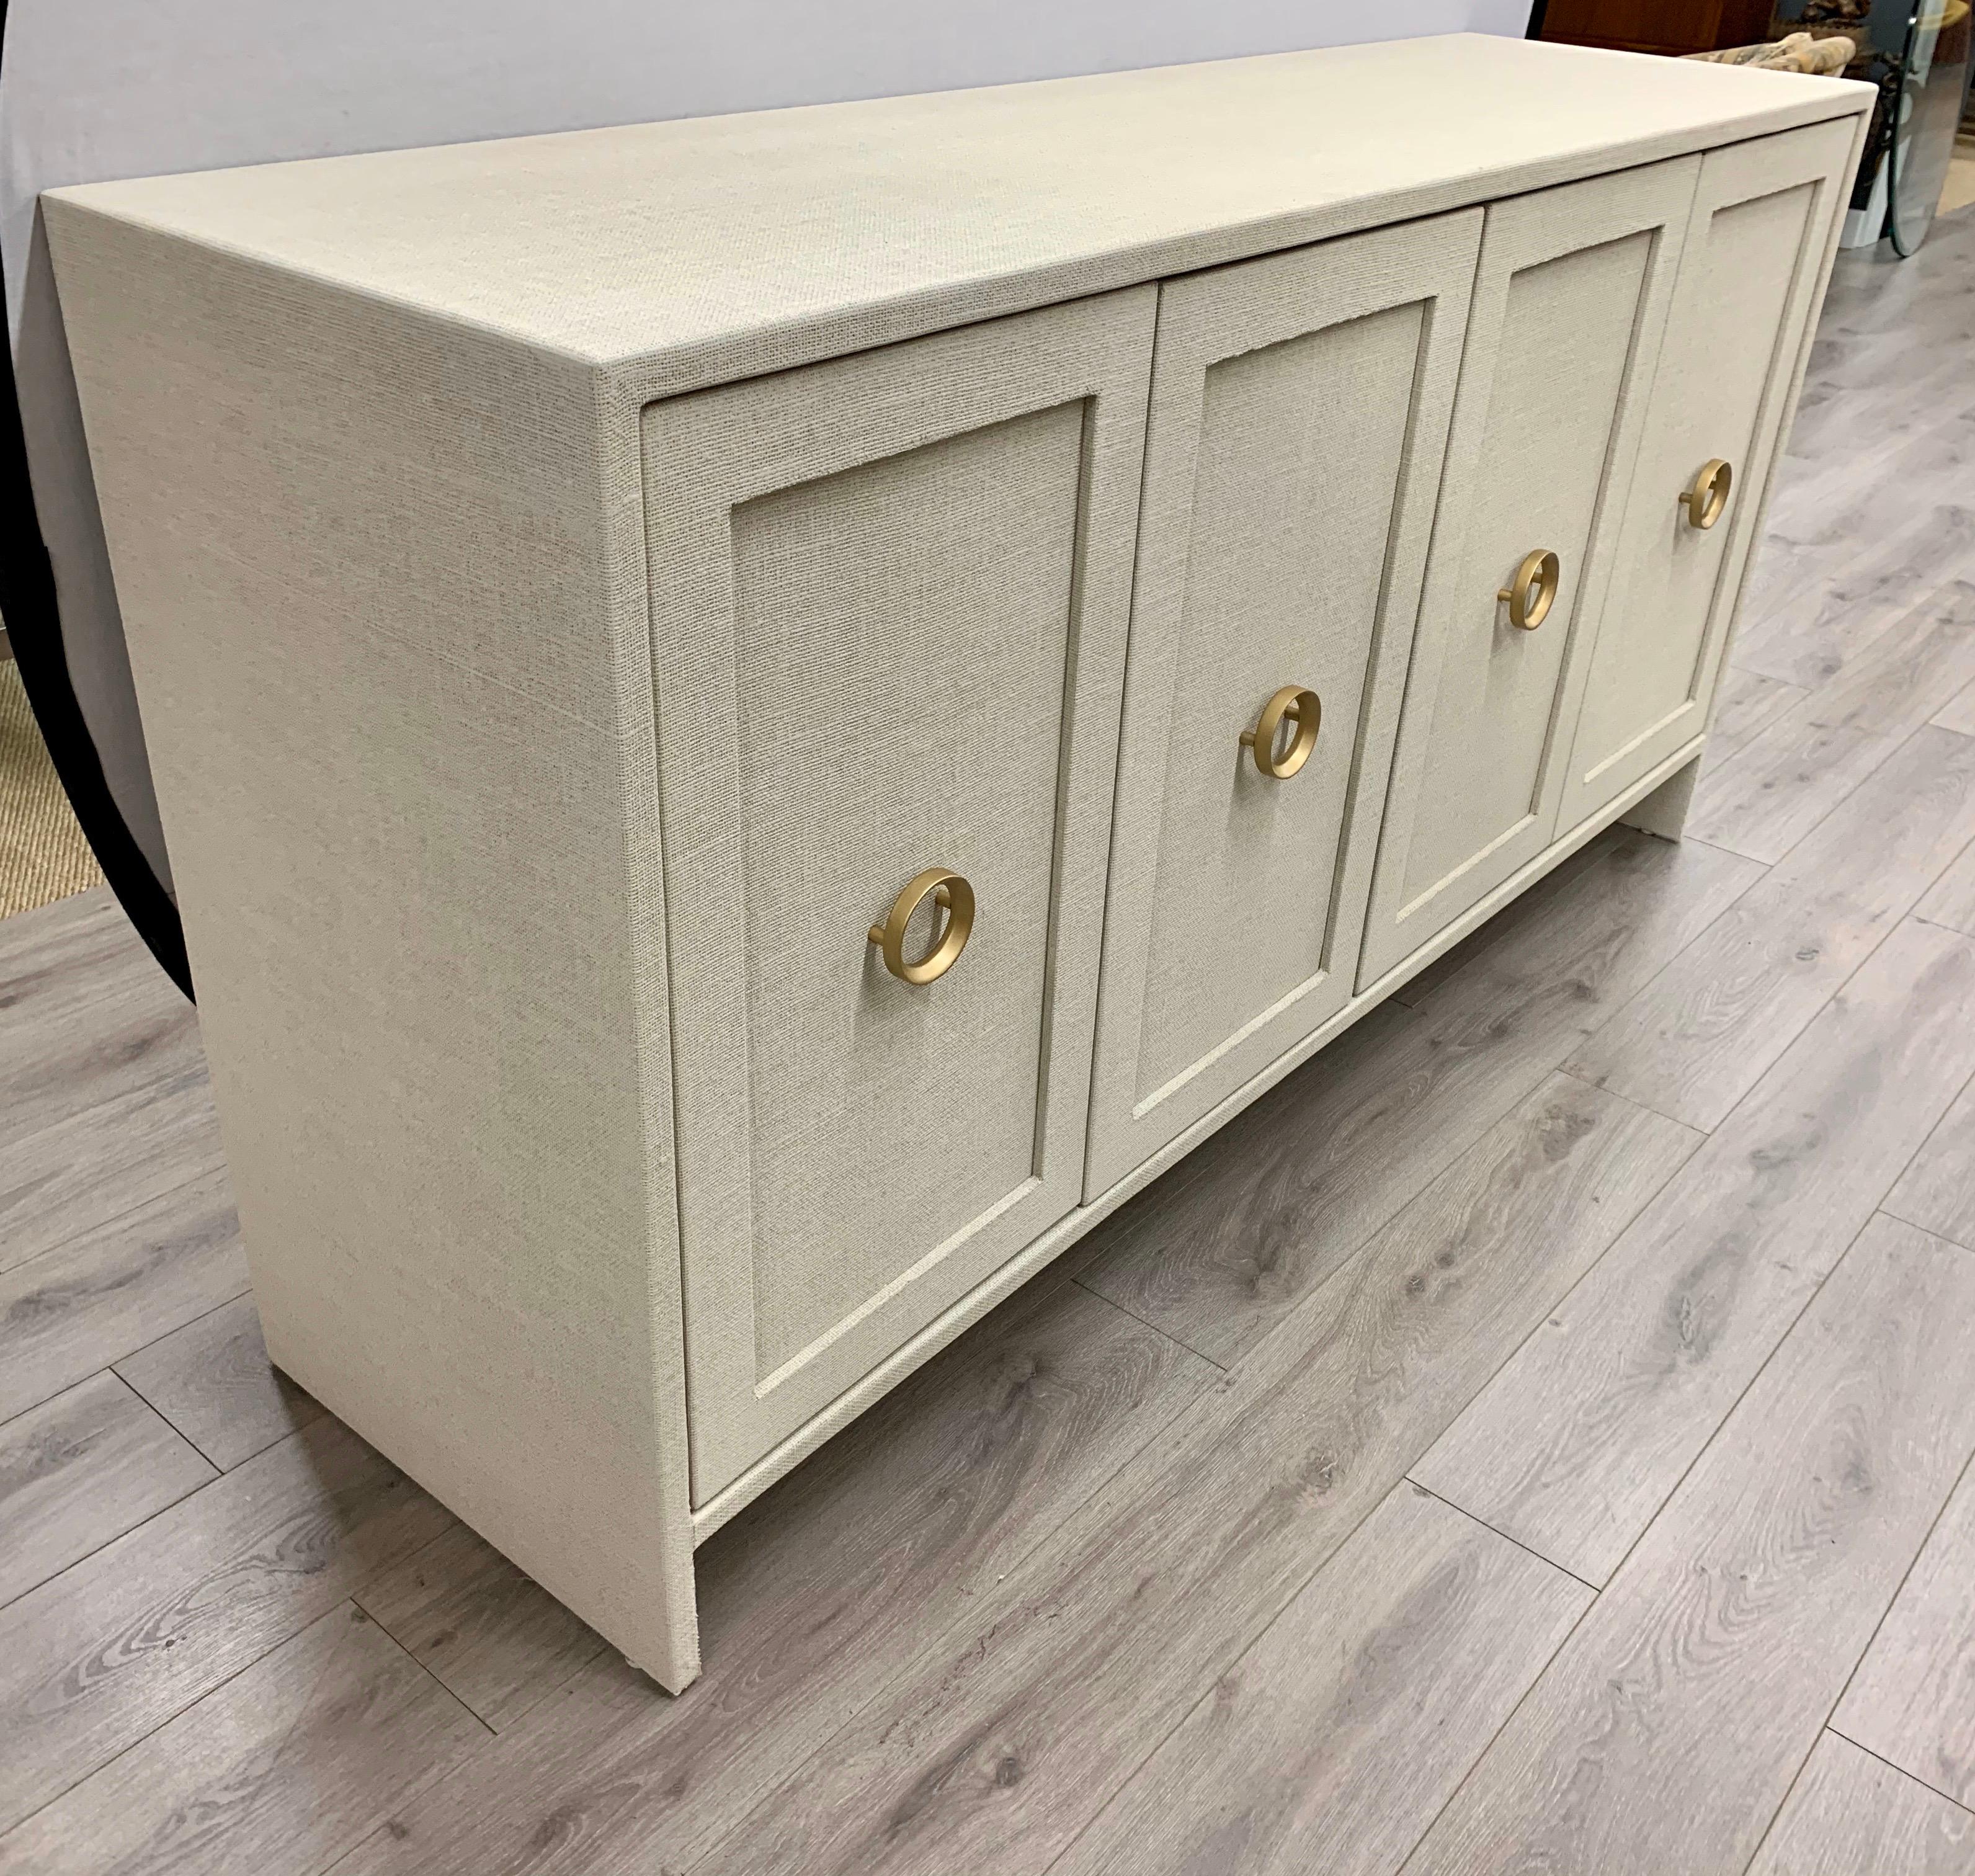 Clean, simple lines give these credenzas a Mid-Century Modern feel. They wrapped by hand in linen then given a multi-layered paint glaze in a neutral oyster color. They have two pairs of double doors that open to shelving. Round brass handles give